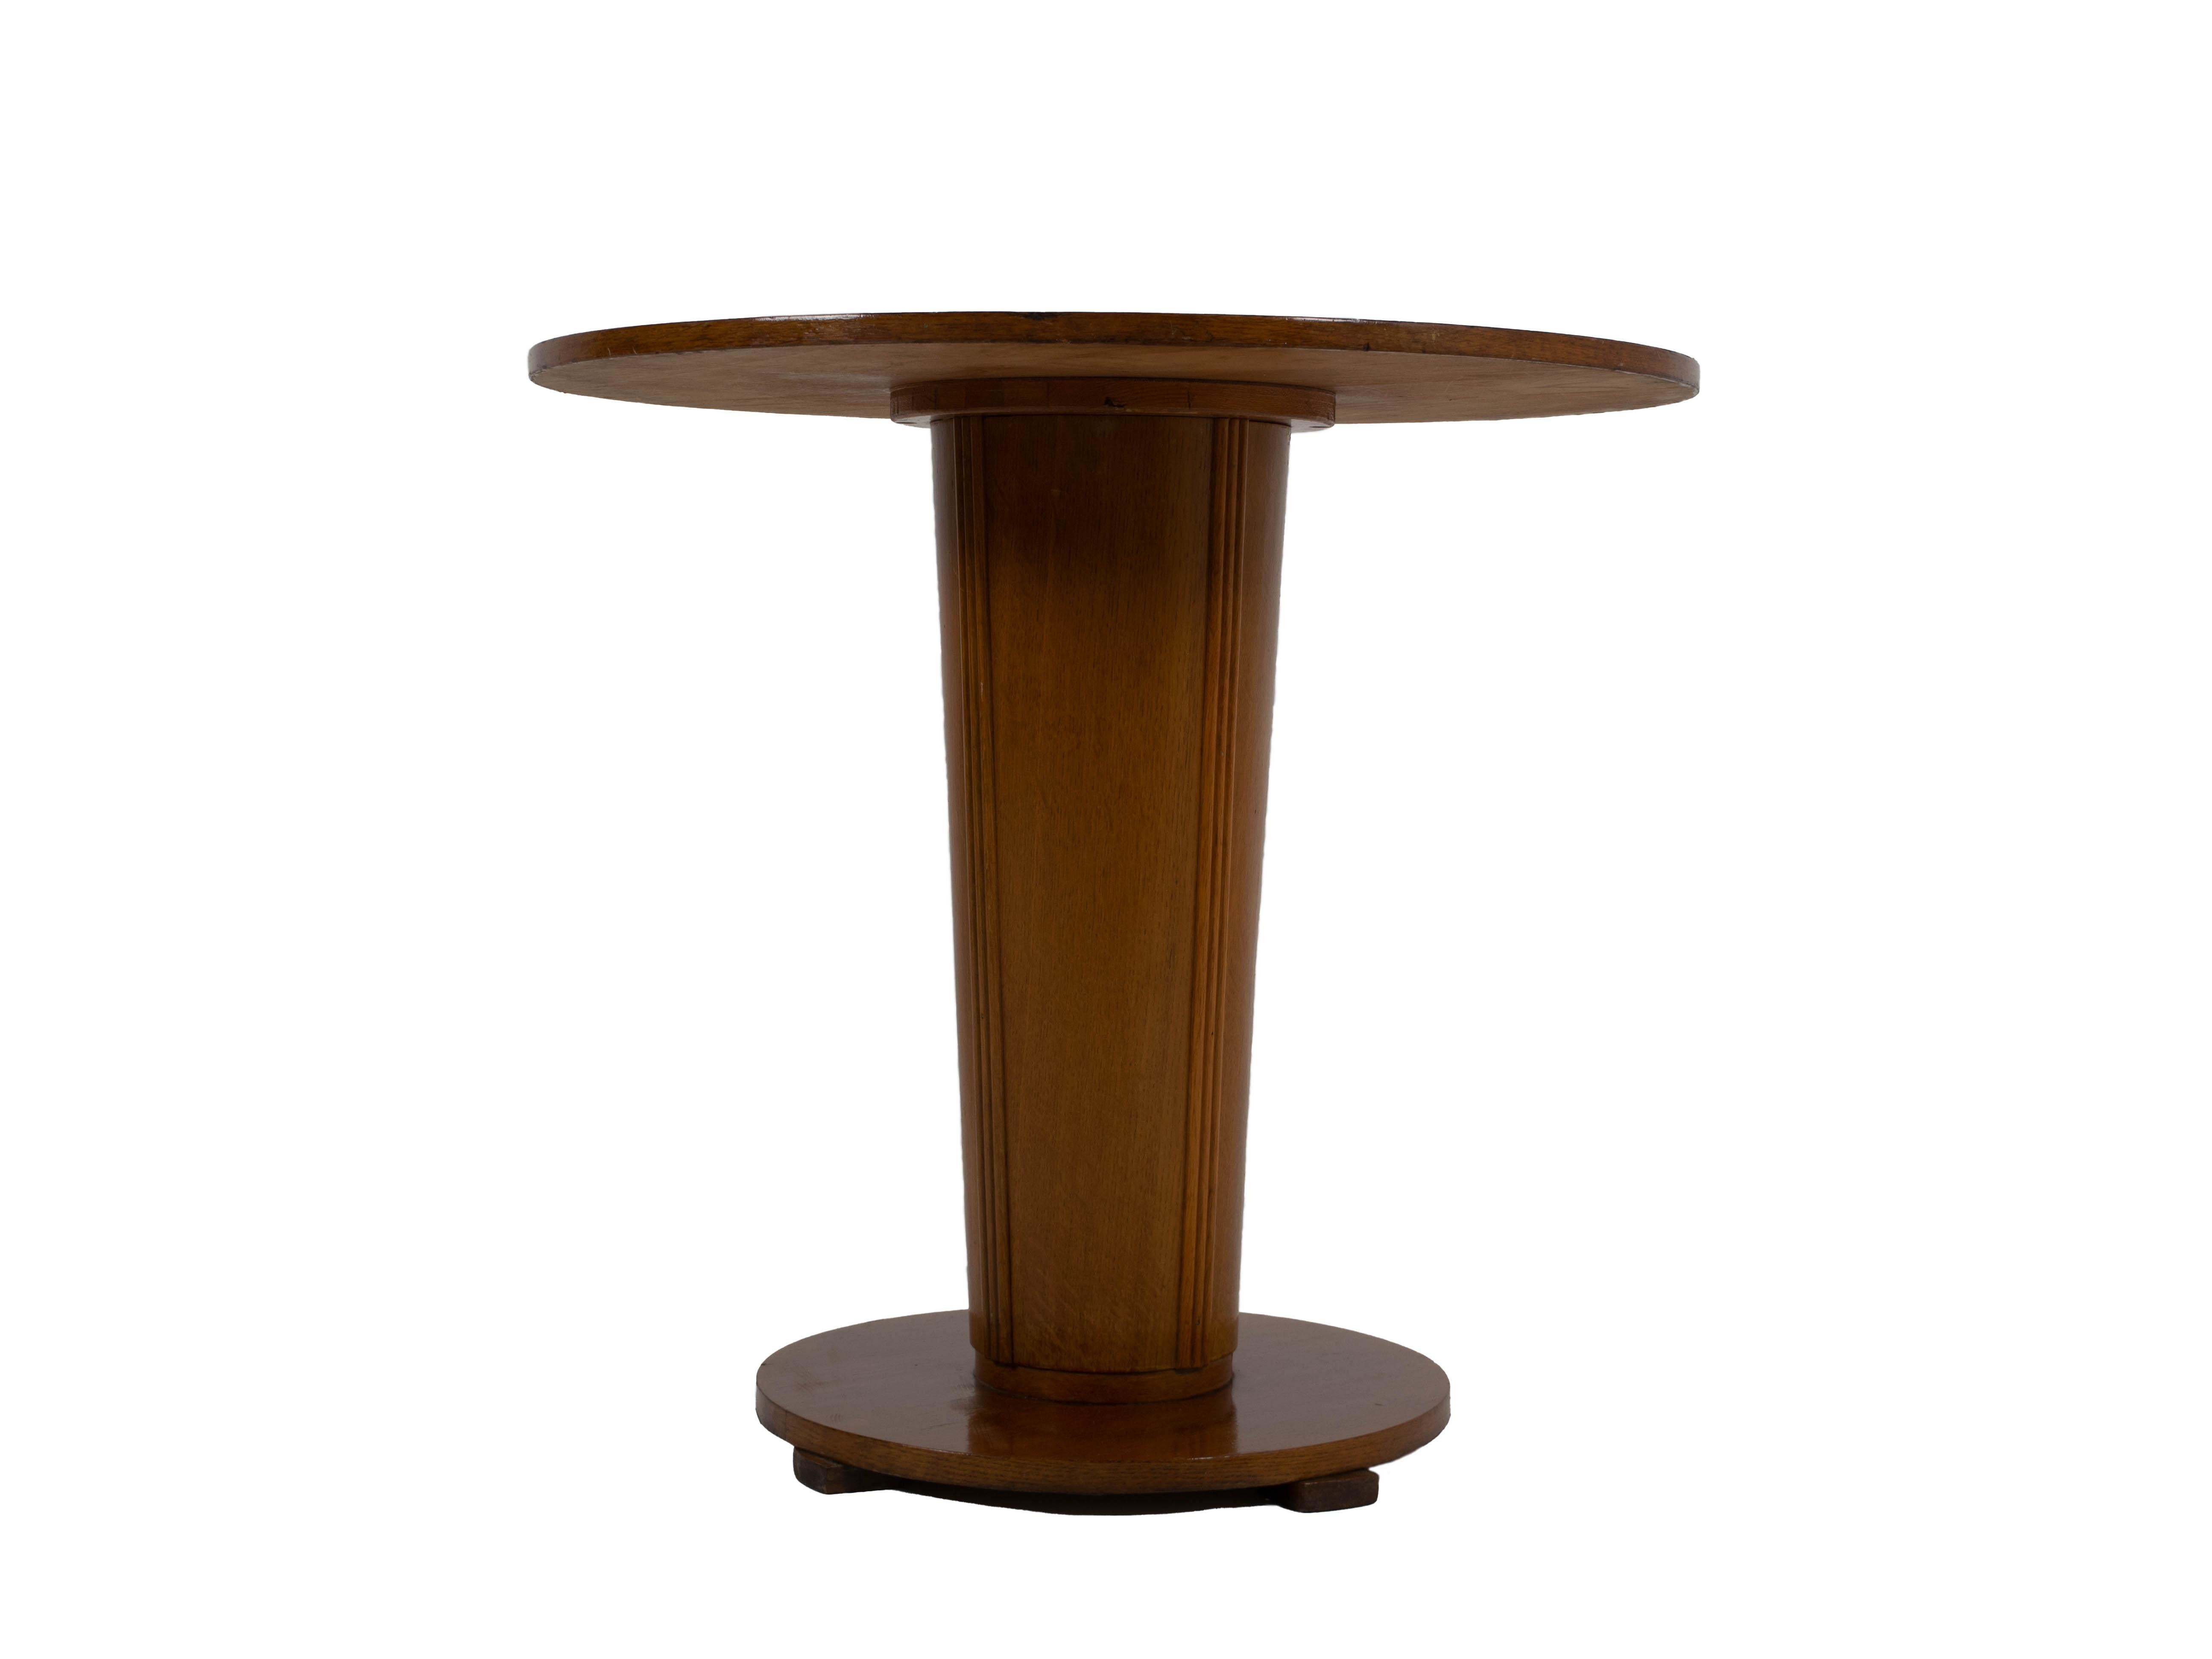 Nice Art Deco sidetable from The Netherlands 1930s. This table has a sleek round design with a nice detailed base. The table is in good condition and the wood has a layer of lacquer on it, giving it a gloss.